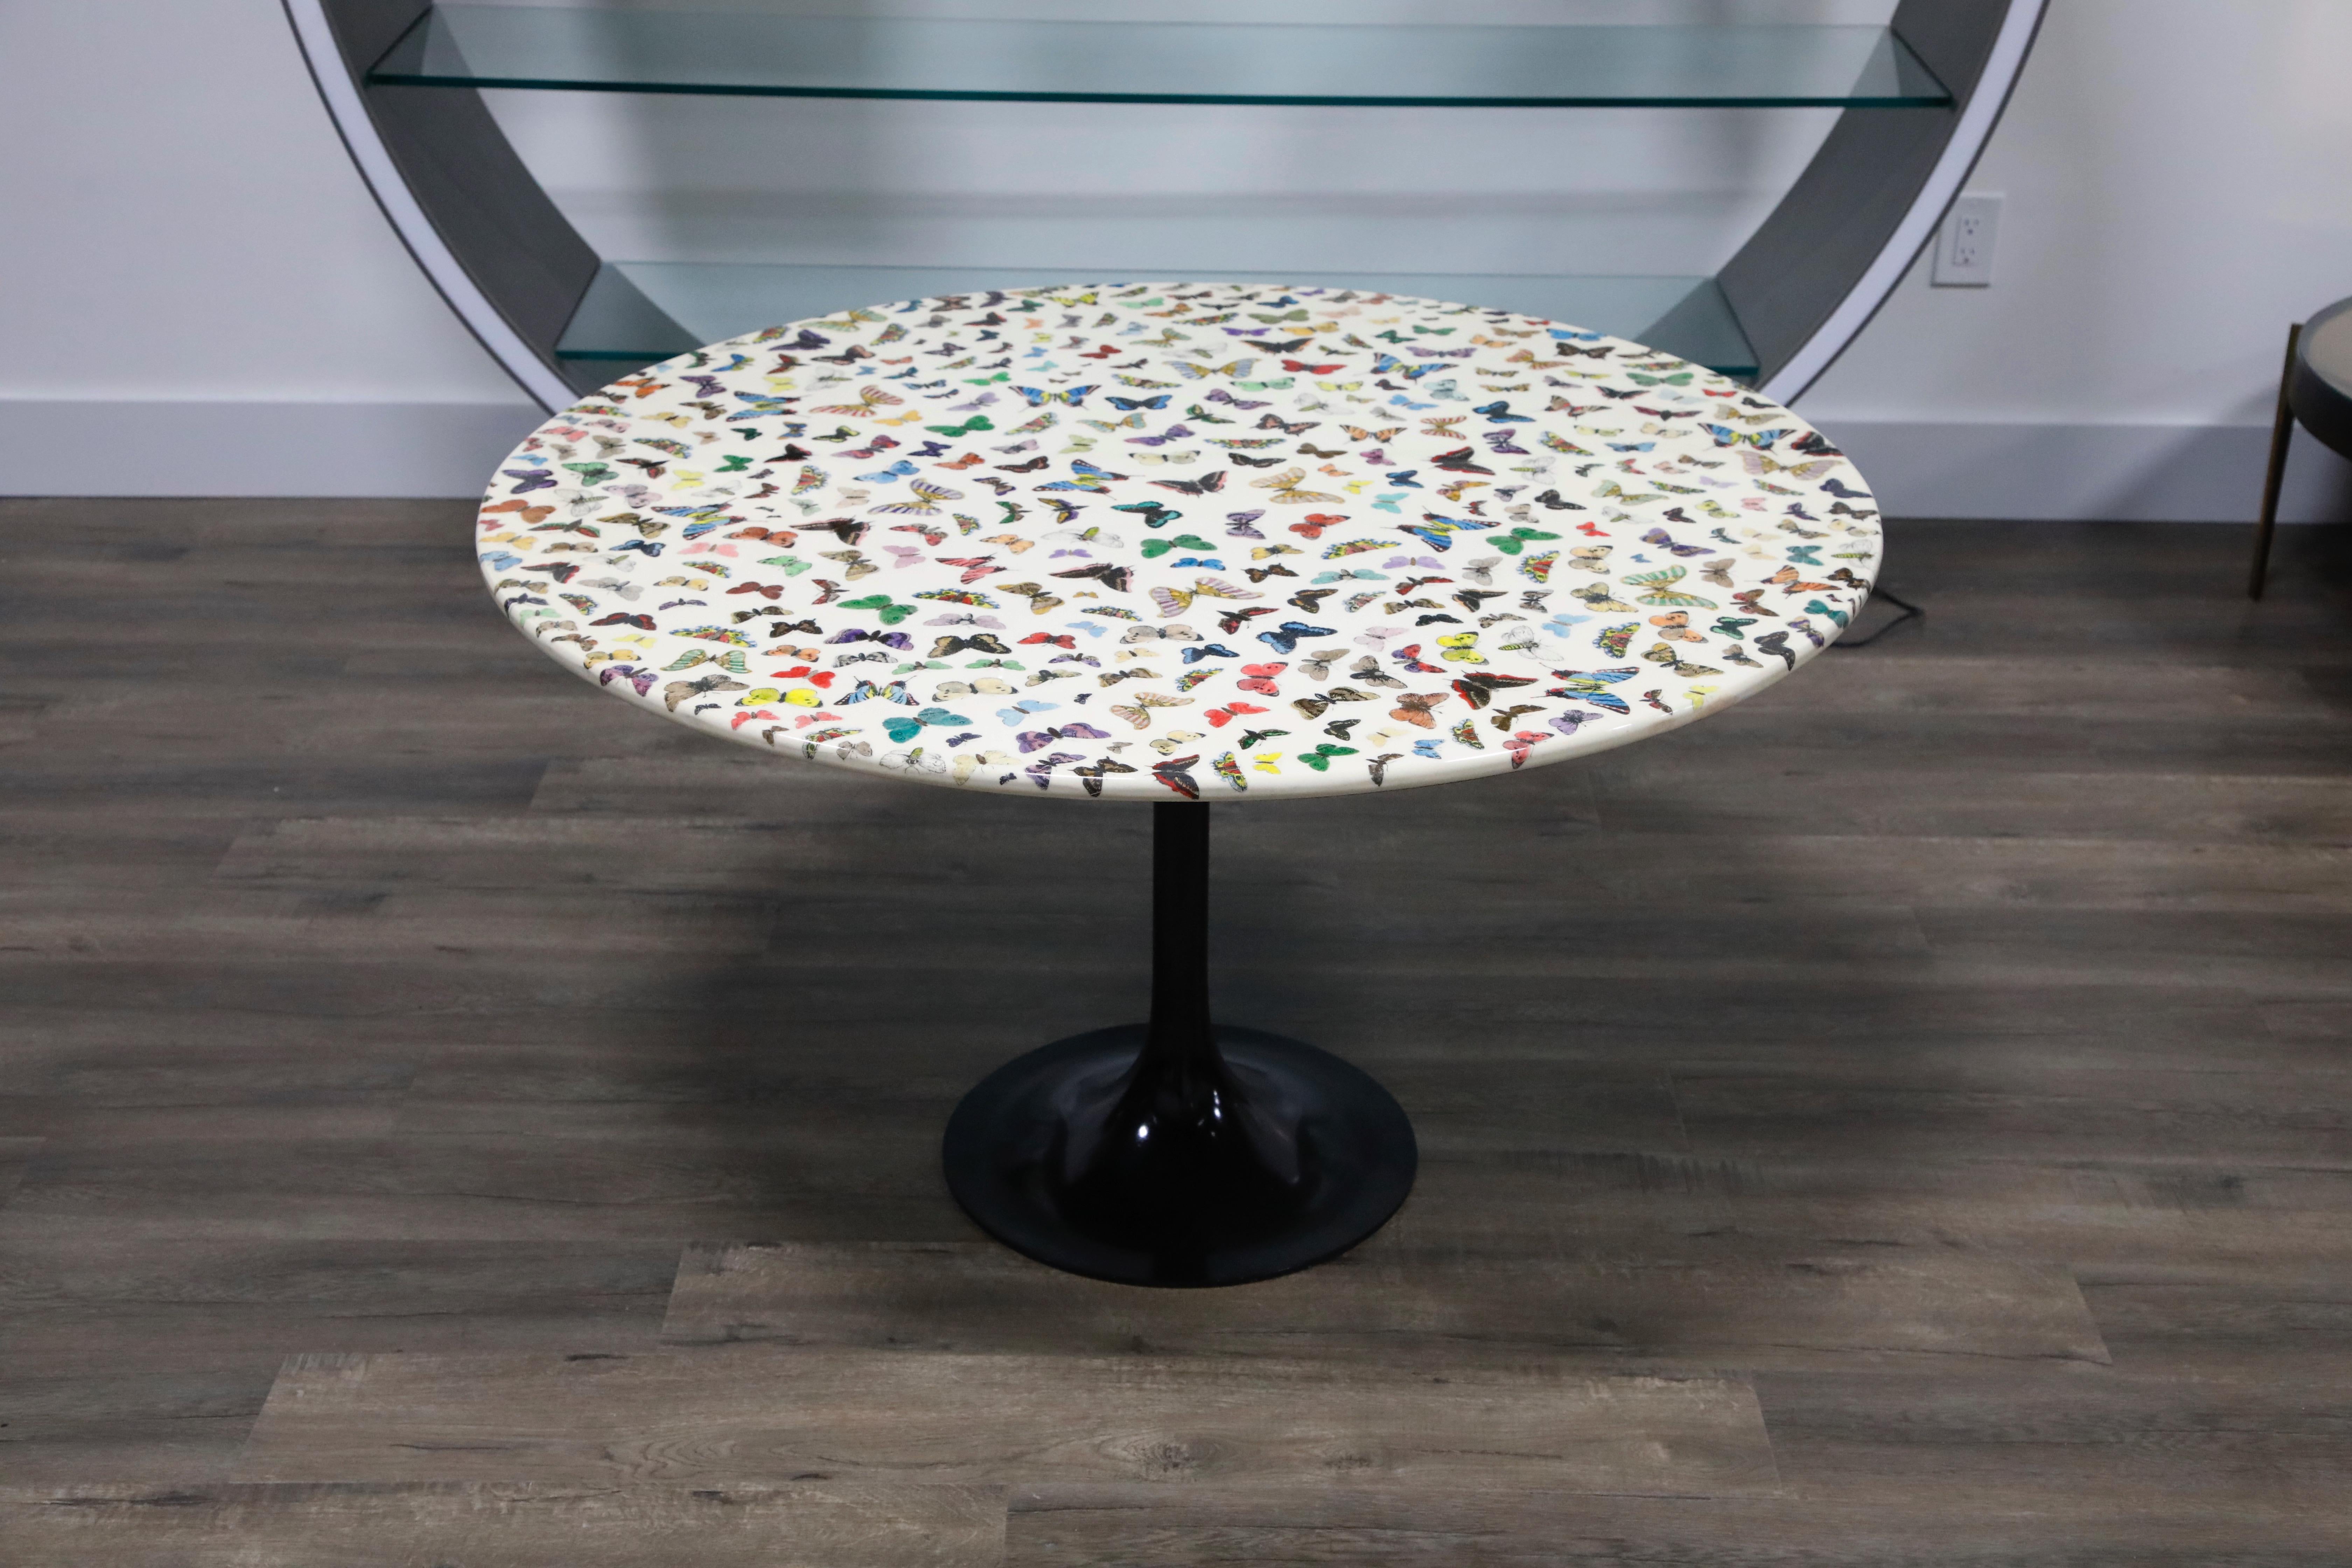 This pièce de résistance collectors item is the 'Farfalle' (translated to 'Butterflies') cafe dining table by Piero Fornasetti, circa 1960s, signed underneath with its original studio label. This round dining table (or center table) is made with